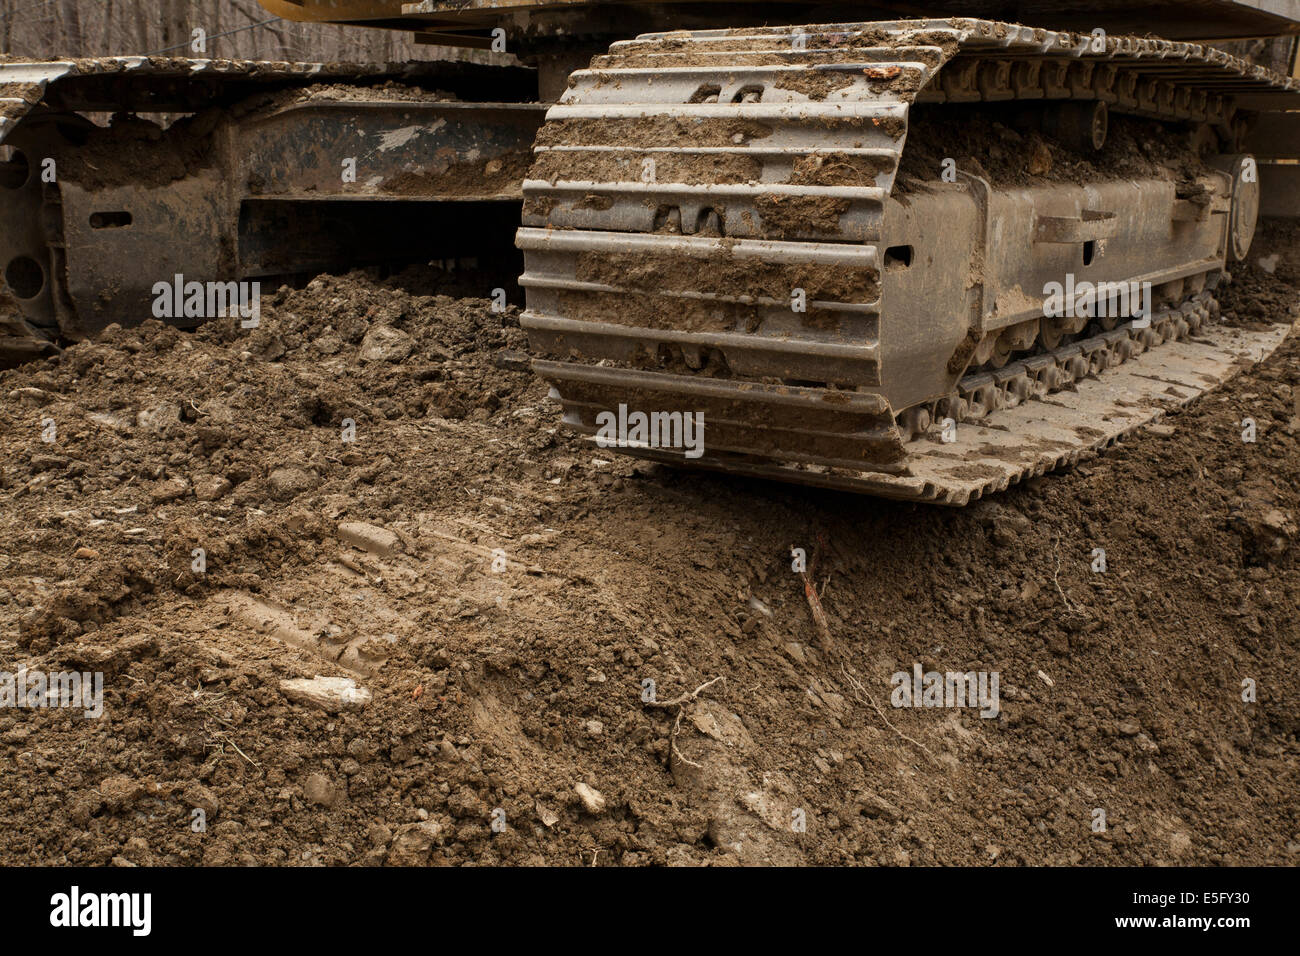 Closeup view of a bulldozer's track and undercarriage, ready to continue with building a home foundation. Stock Photo